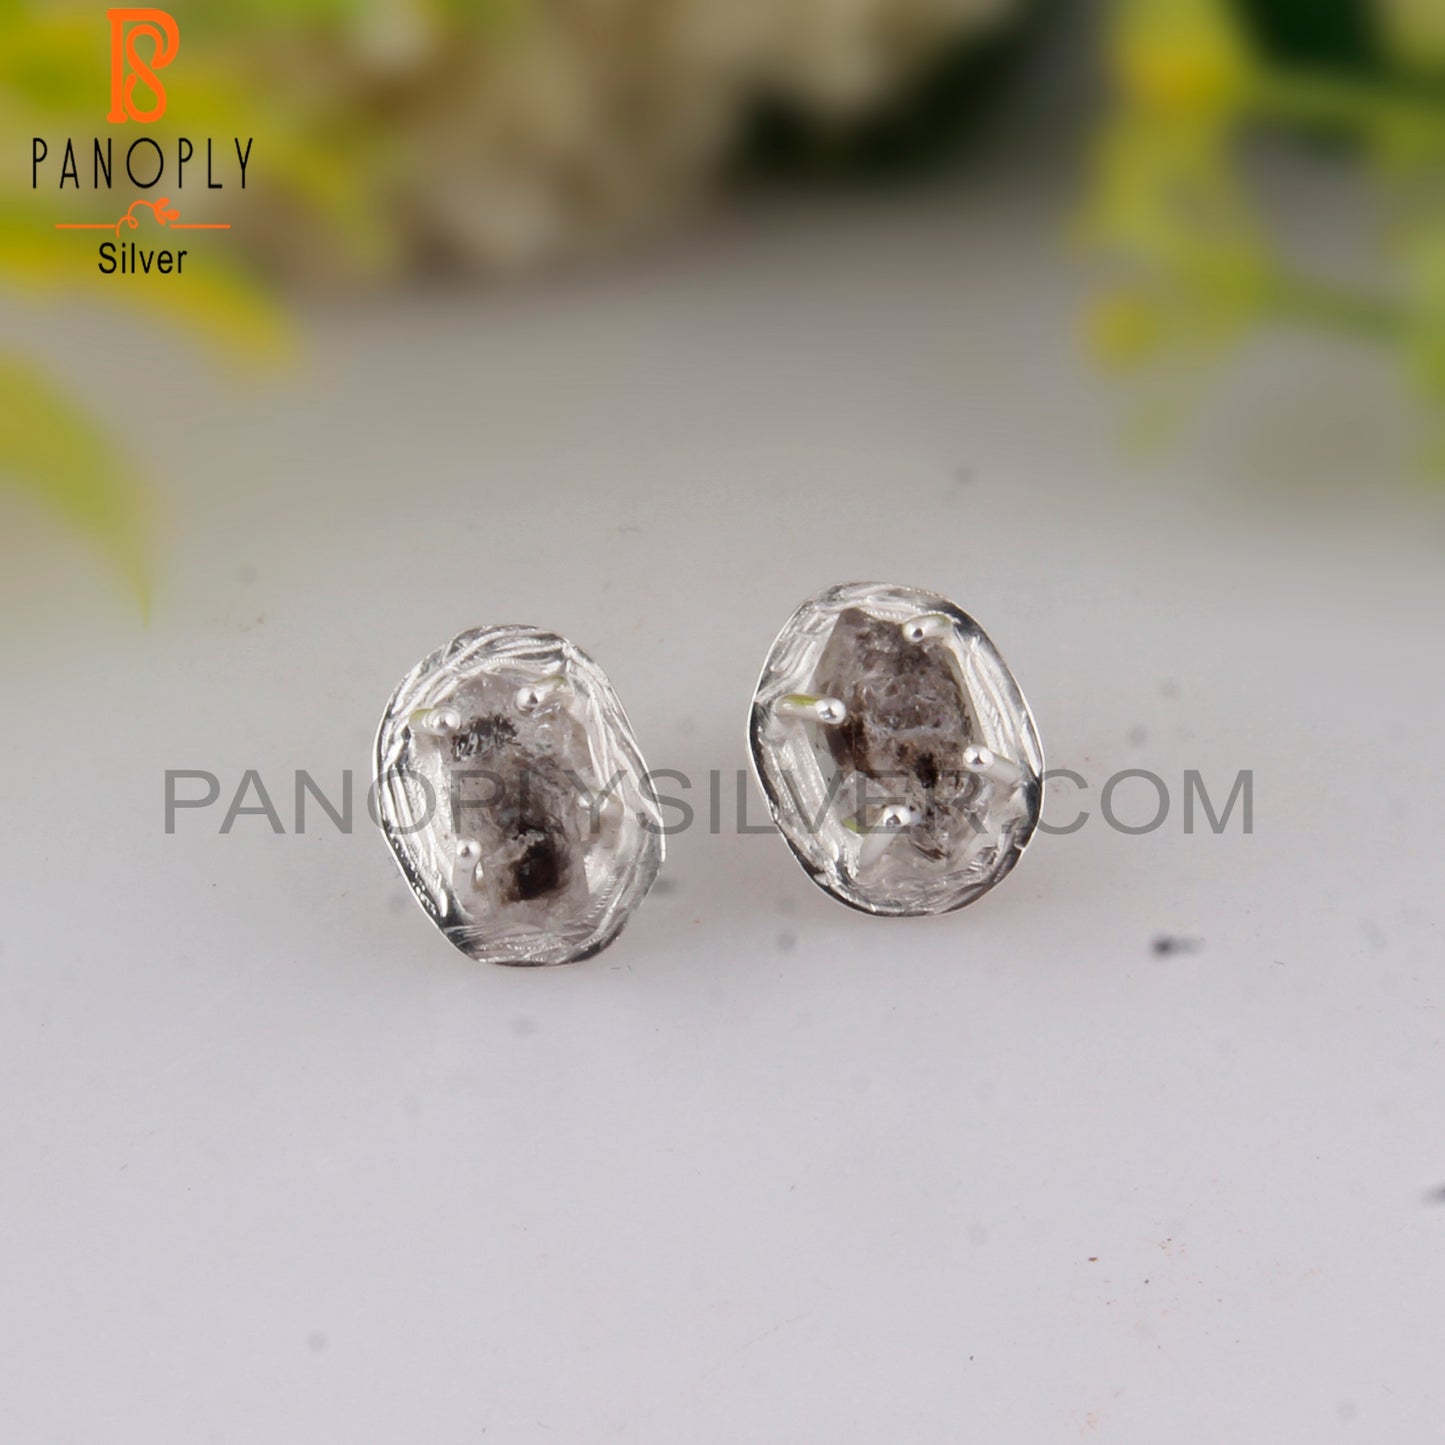 Natural Unique Herkimer Diamond 925 Silver Earrings